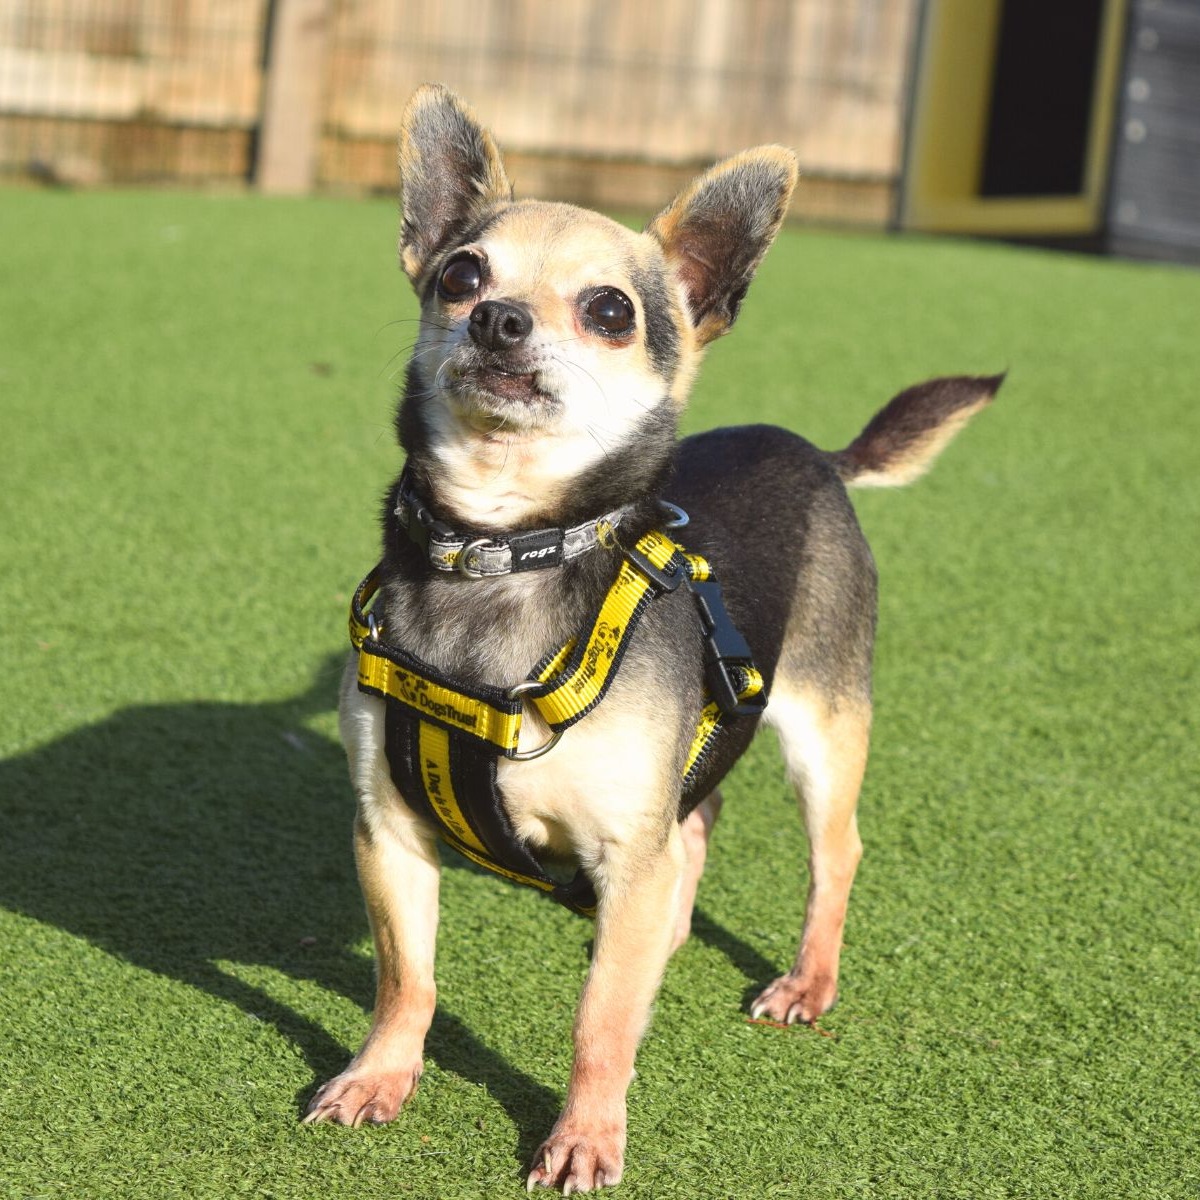 Meet our #GoldenOldie Ralph 🐶

He has been spending some time in foster before he starts searching for his forever home soon. Isn't his grey-speckled face super cute?!

#Chihuahua #Adoption #rehoming #rescue #DogsTrustWestLondon #Foster